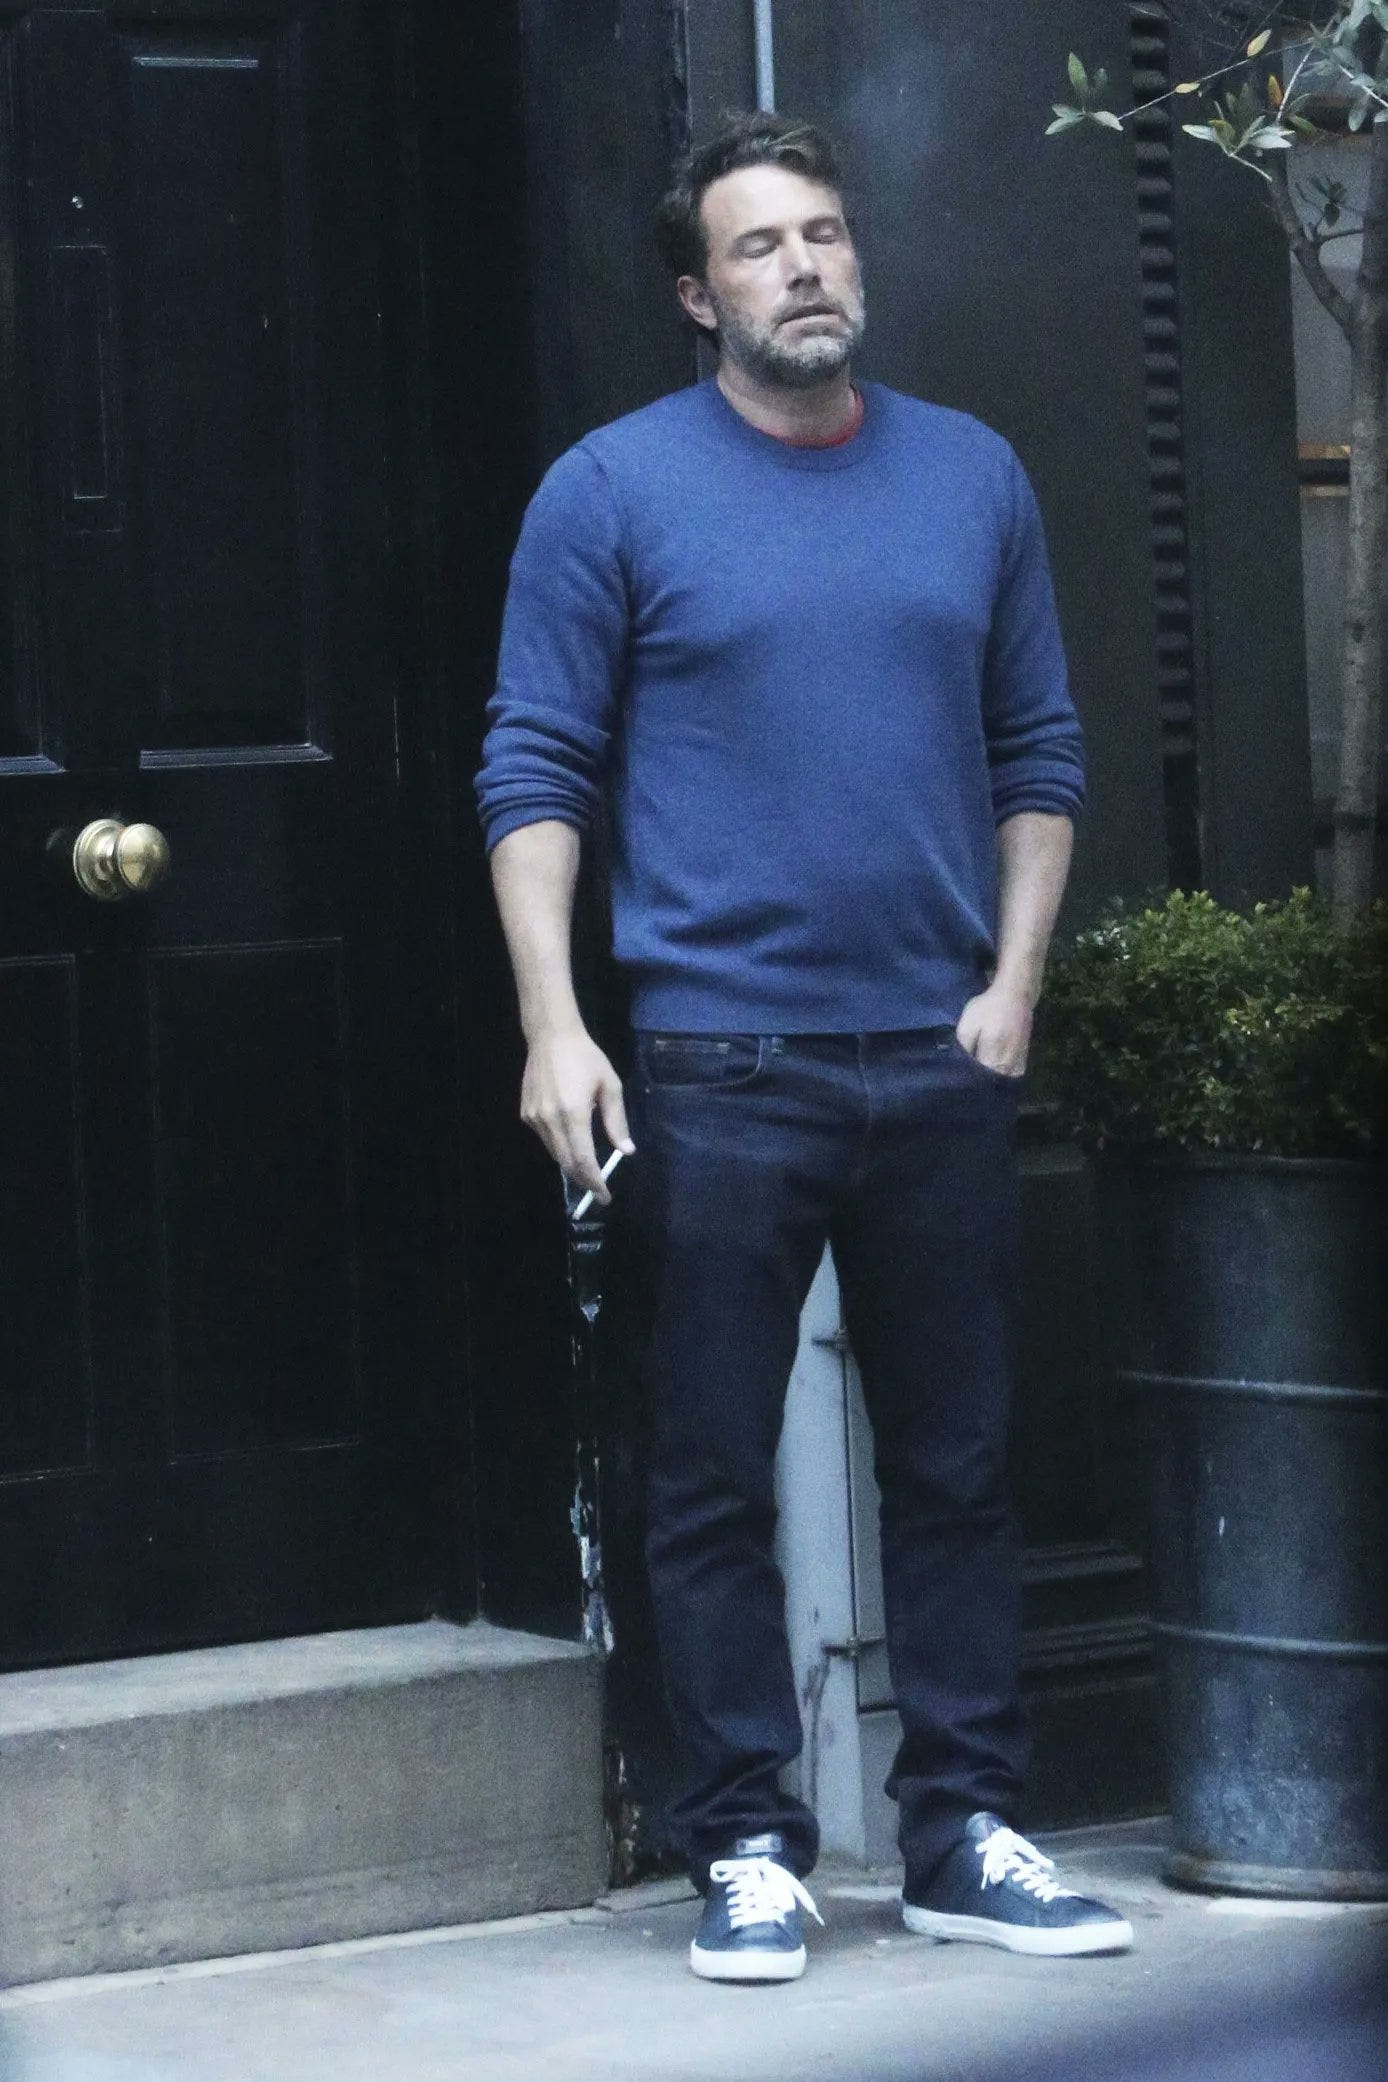 A picture of actor Ben Affleck wearing jeans and a blue sweater while standing outside a building smoking a cigarette and looking like he is done with life.